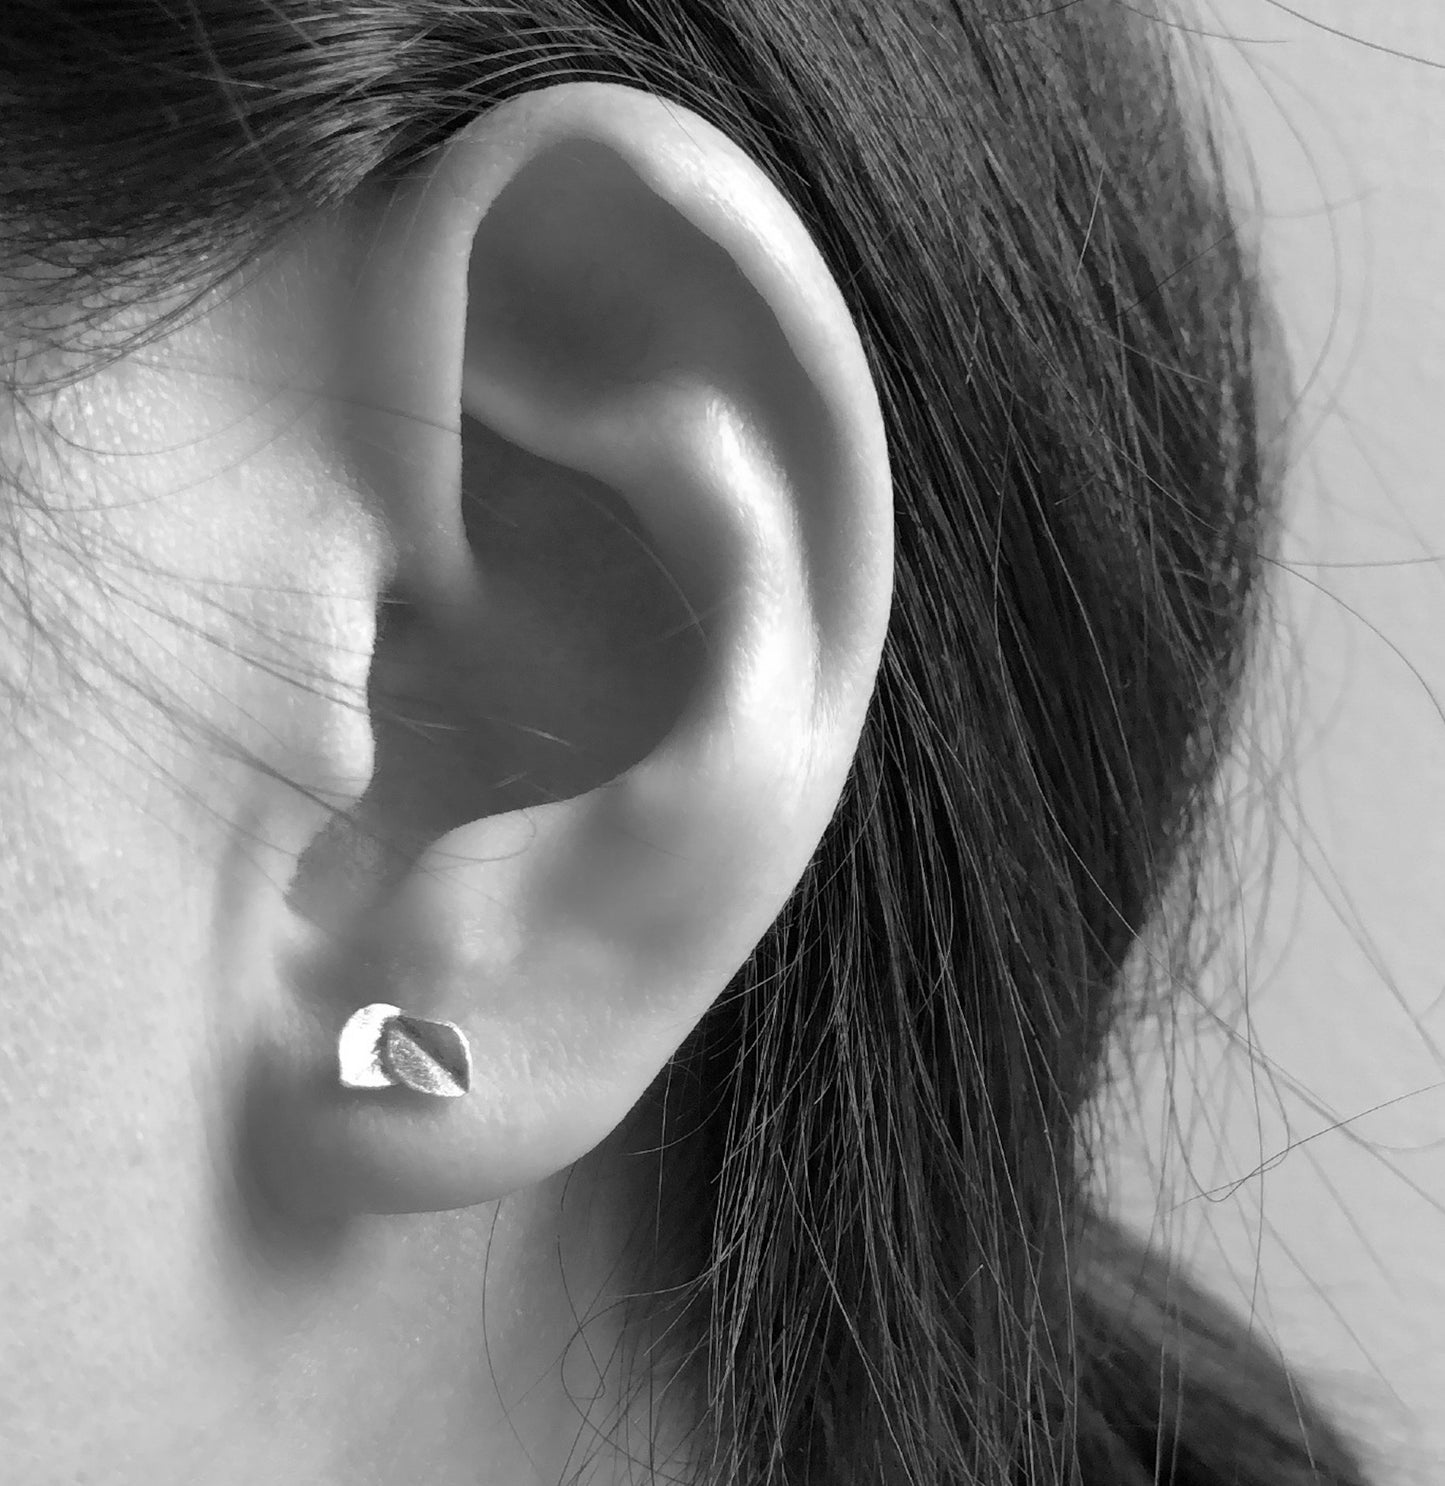 Thank You Sterling Silver Small Leaf Earrings